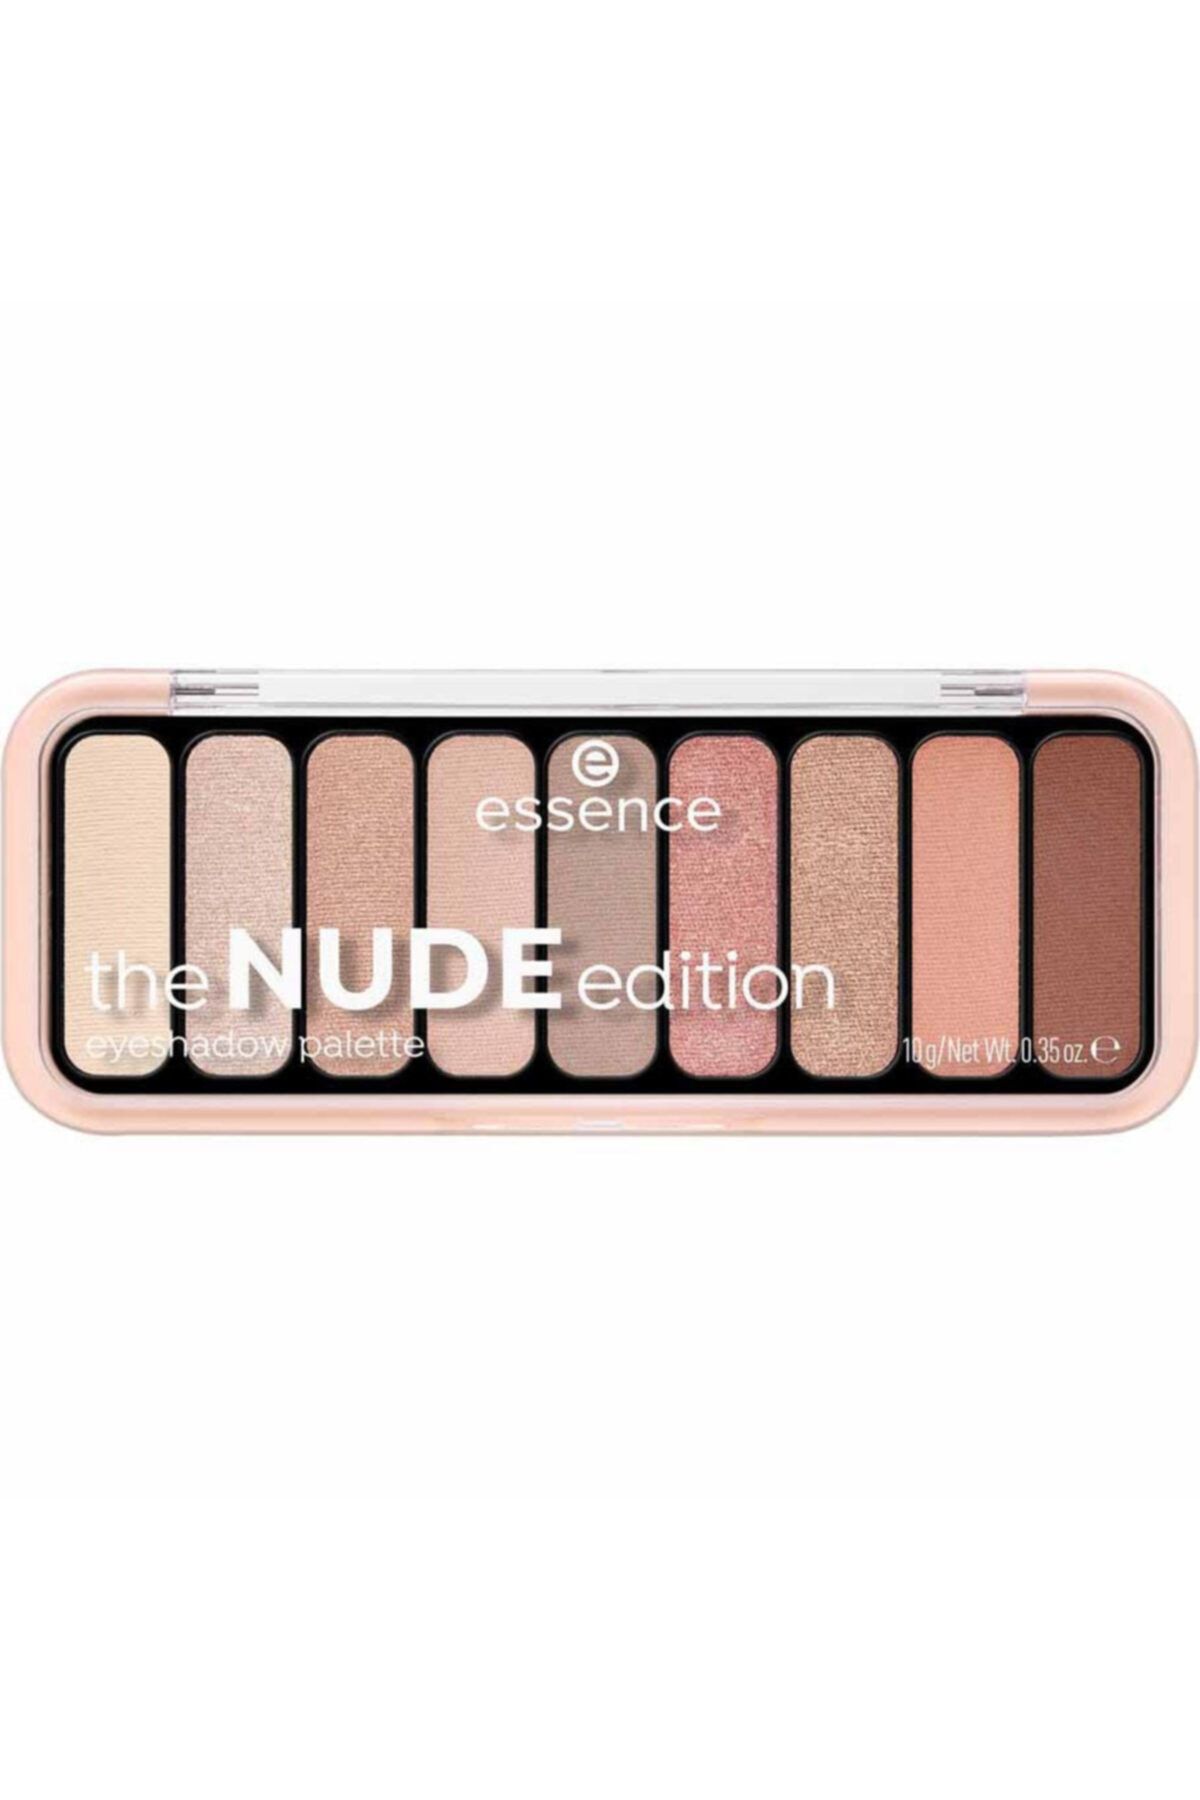 Essence The Nude Edition Eyeshadow Palette 10 4059729245854